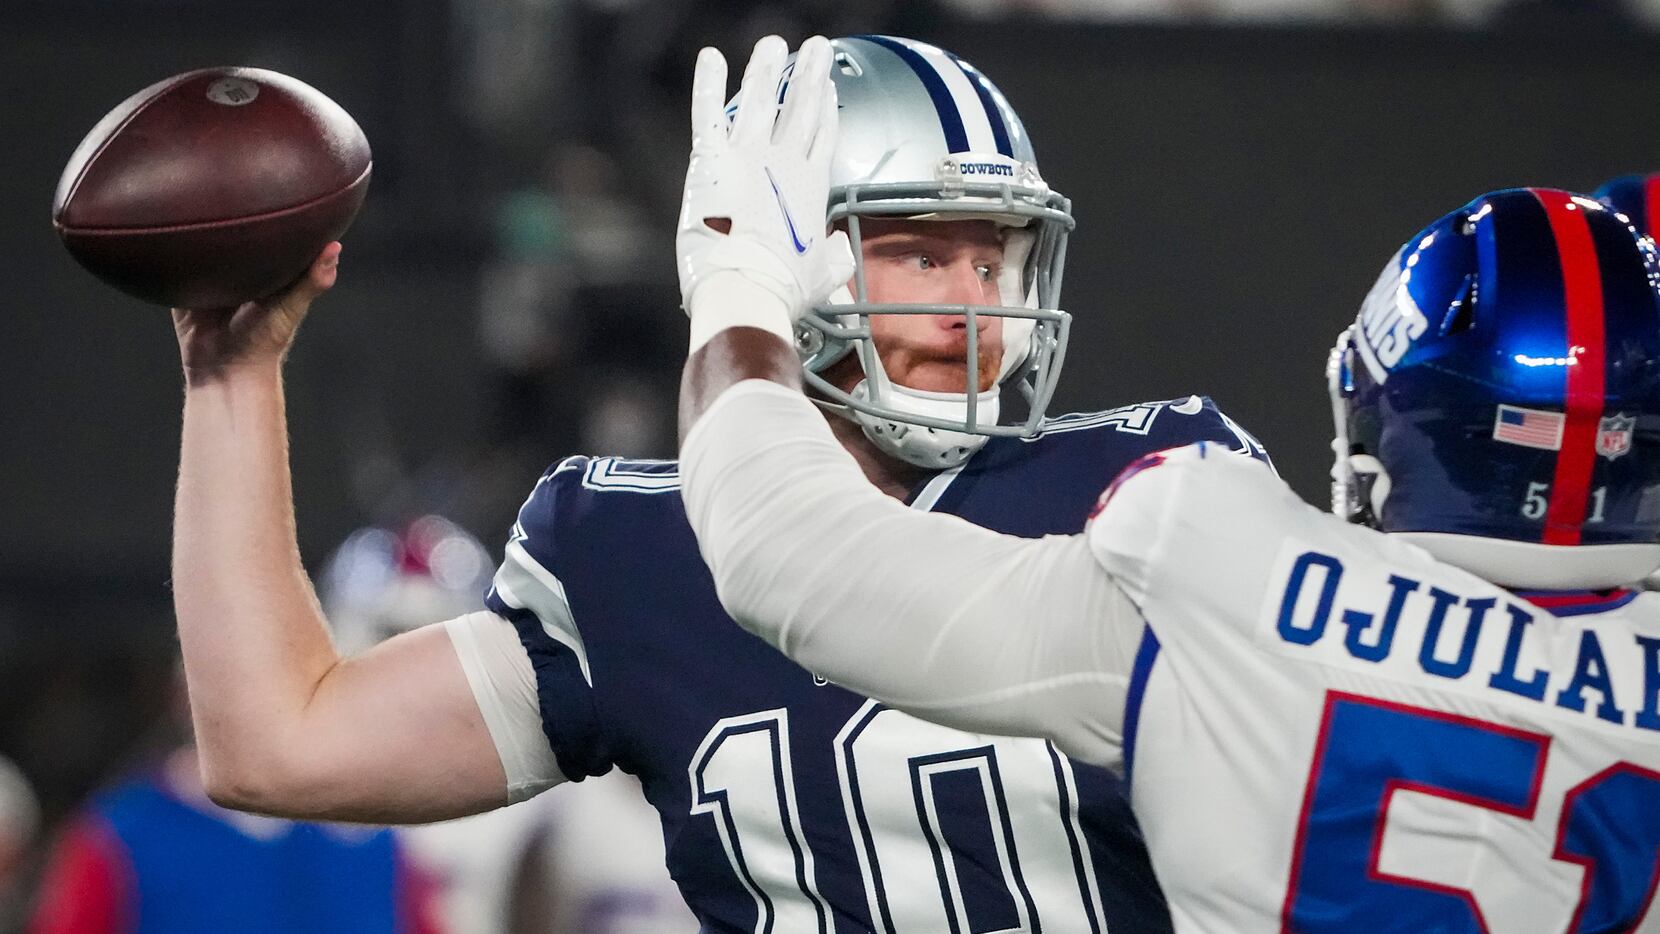 National reaction to Cowboys-Giants: Cooper Rush continues to win